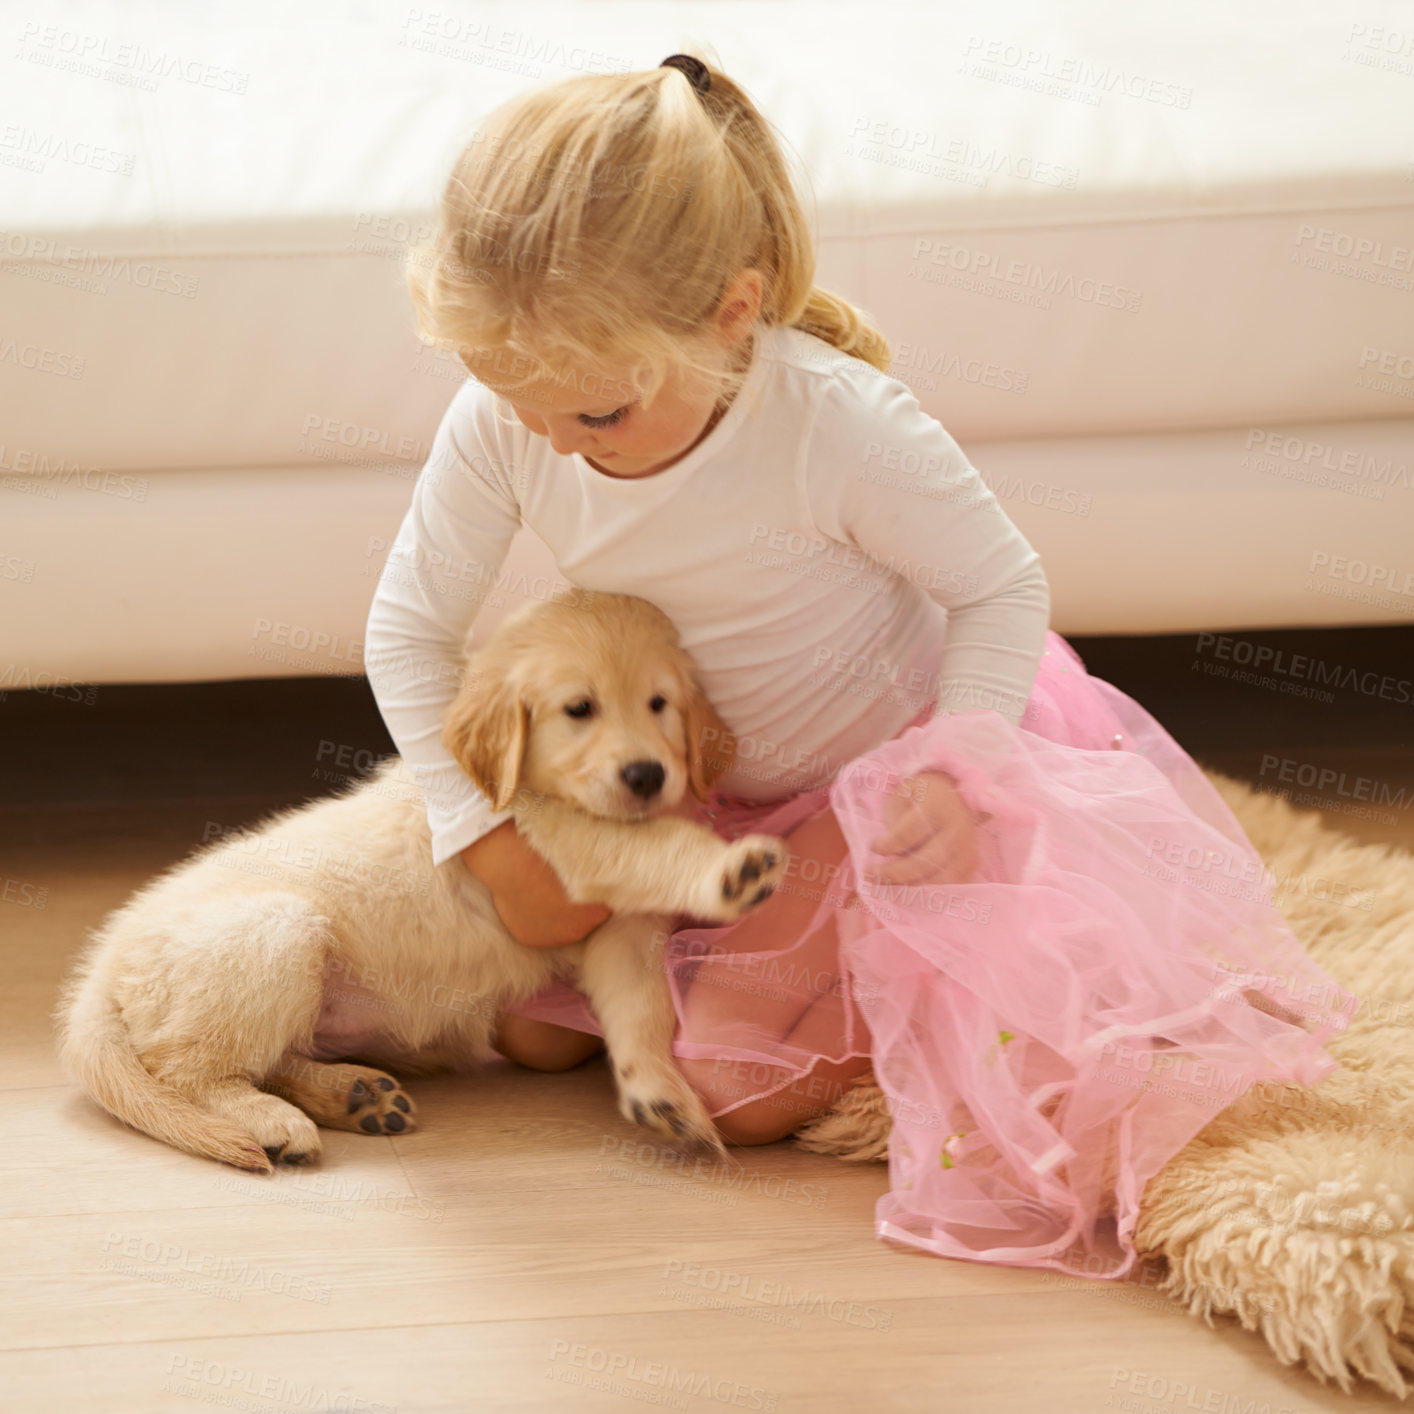 Buy stock photo Child, golden retriever or dog playing together in a happy home with love, care and development. Girl kid and animal, puppy or pet in a tutu for dress up game as friends on the living room floor 